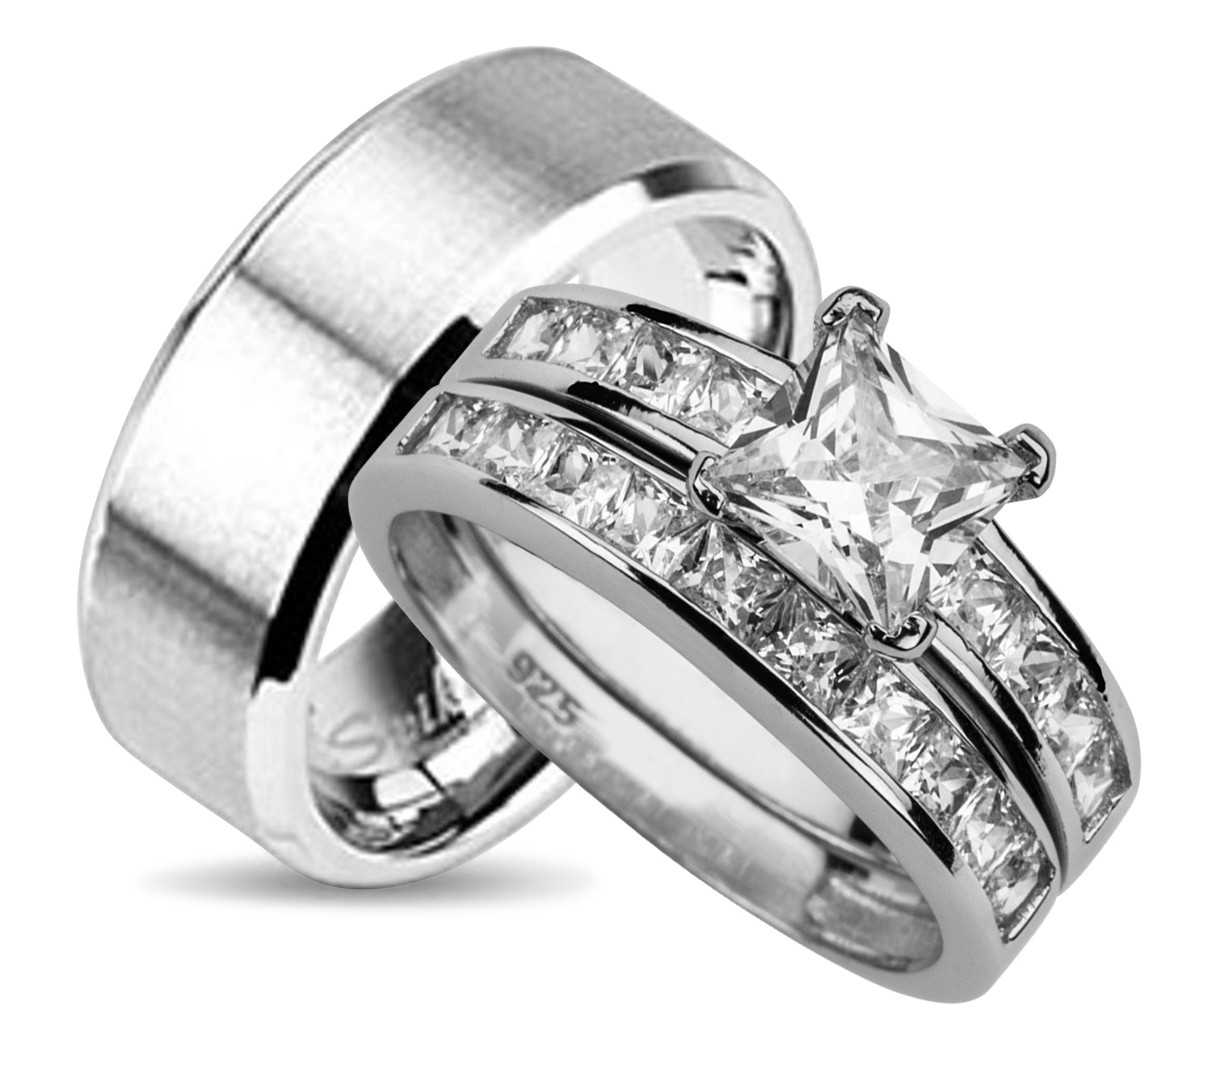 Wedding Bands For Him And Her
 LaRaso & Co His and Hers Wedding Ring Set Matching